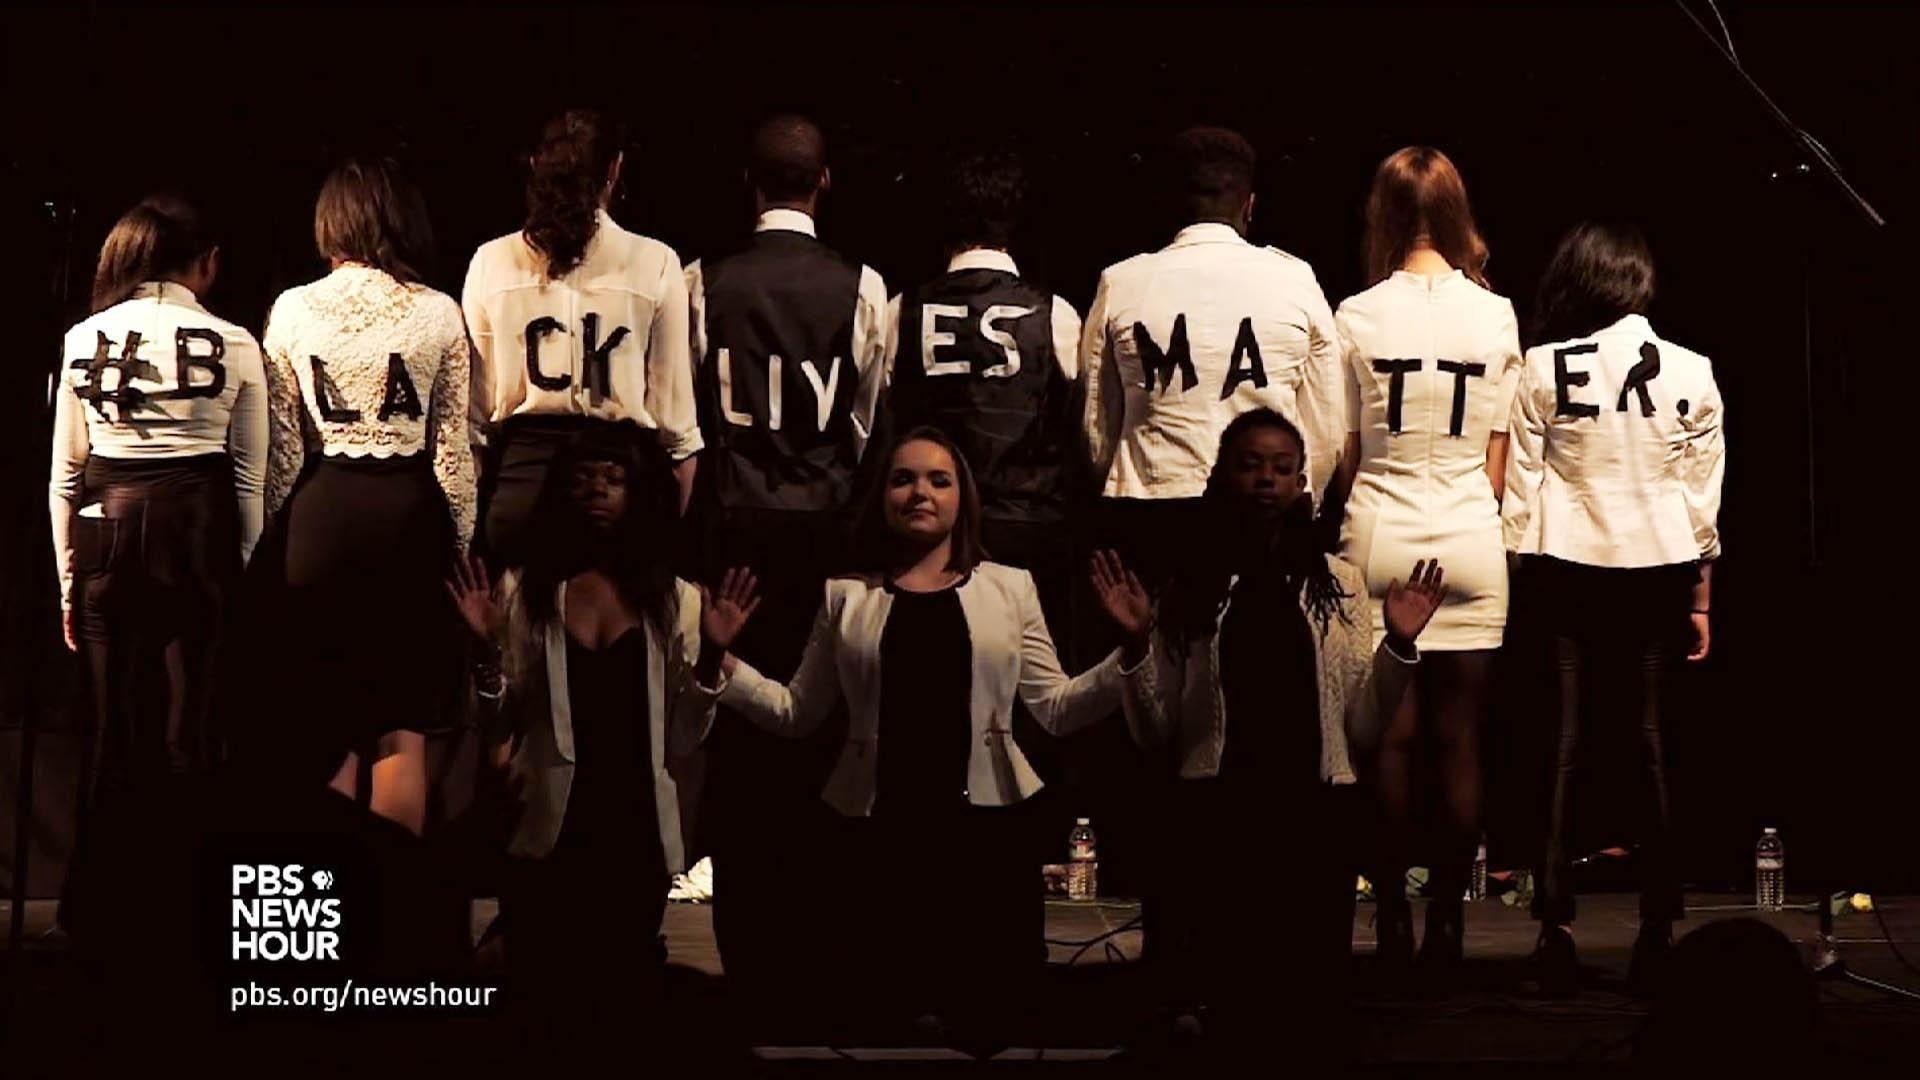 PBS NewsHour sing in support of Black Lives Matter